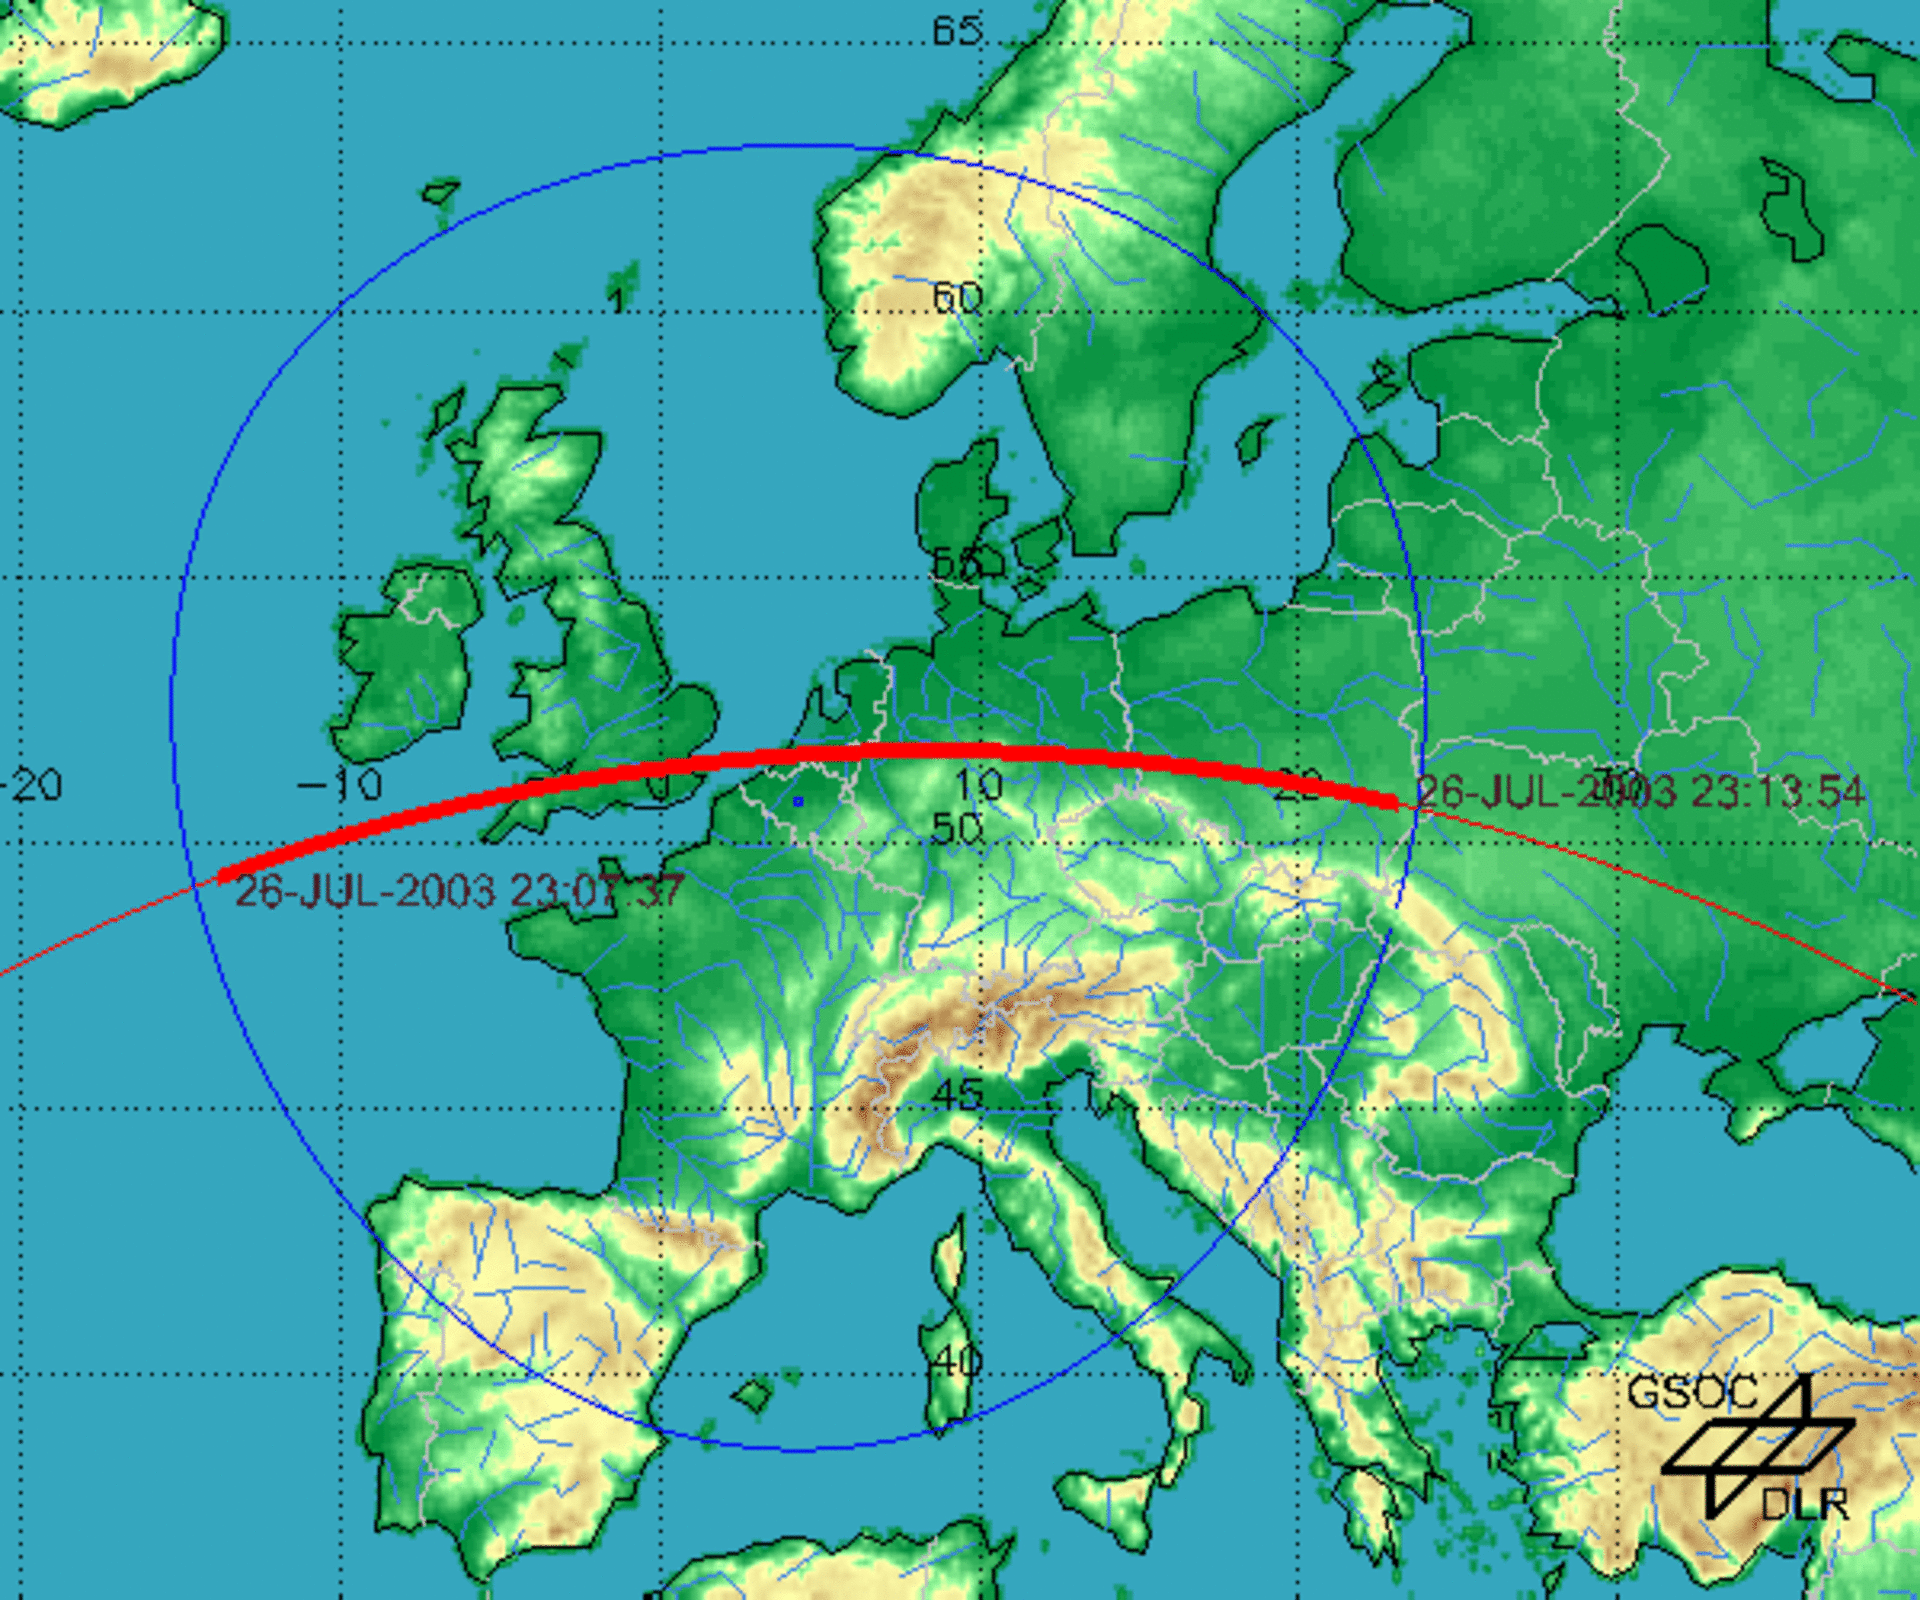 ISS pass over northern Europe on 26 July